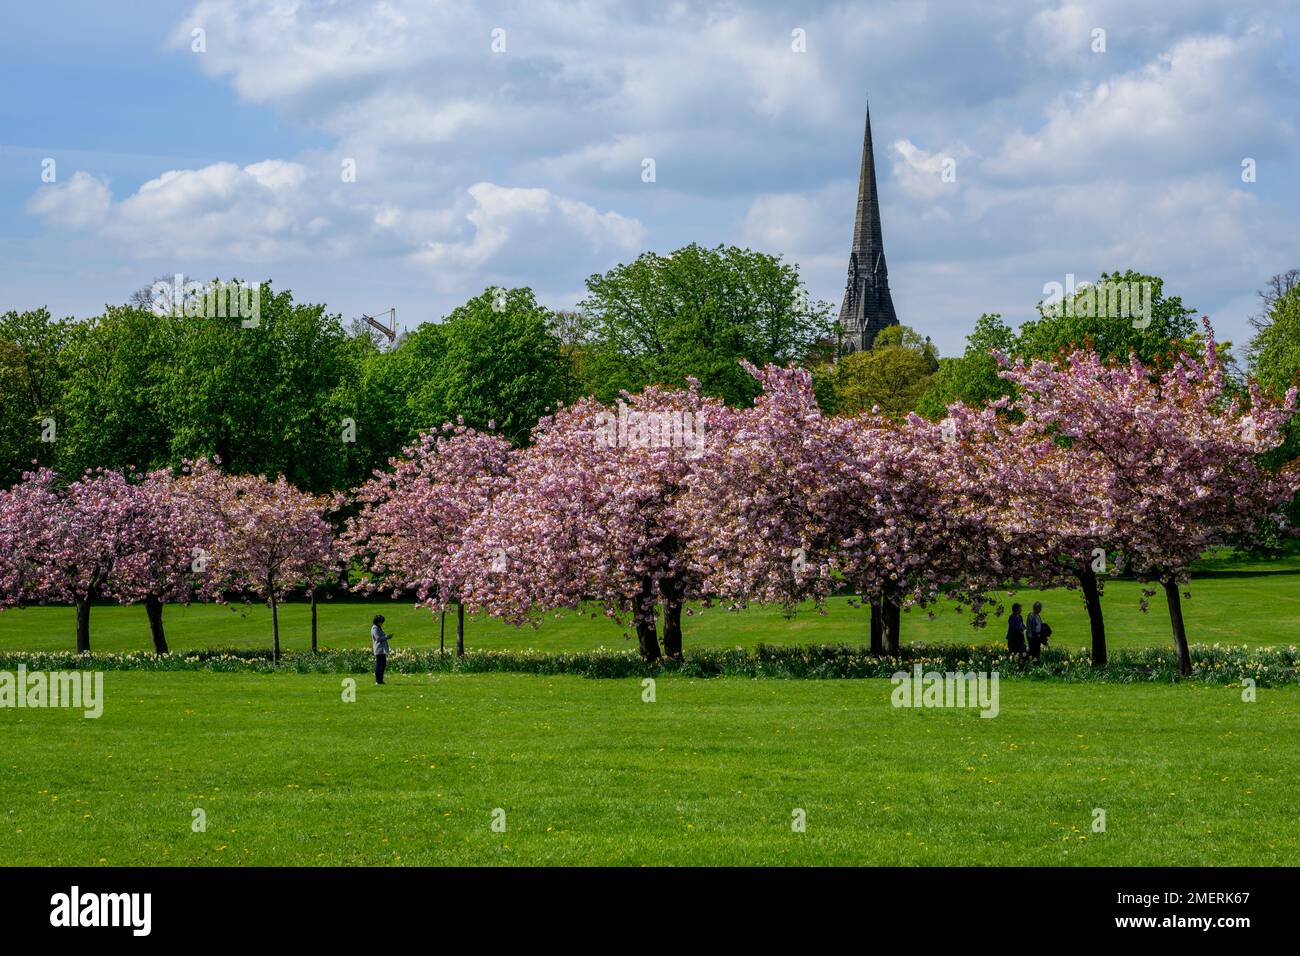 Scenic parkland tree avenue (colourful pink blossom in bloom, relaxing visitors' day-out, blue sky, church spire) - The Stray, Harrogate, England, UK. Stock Photo